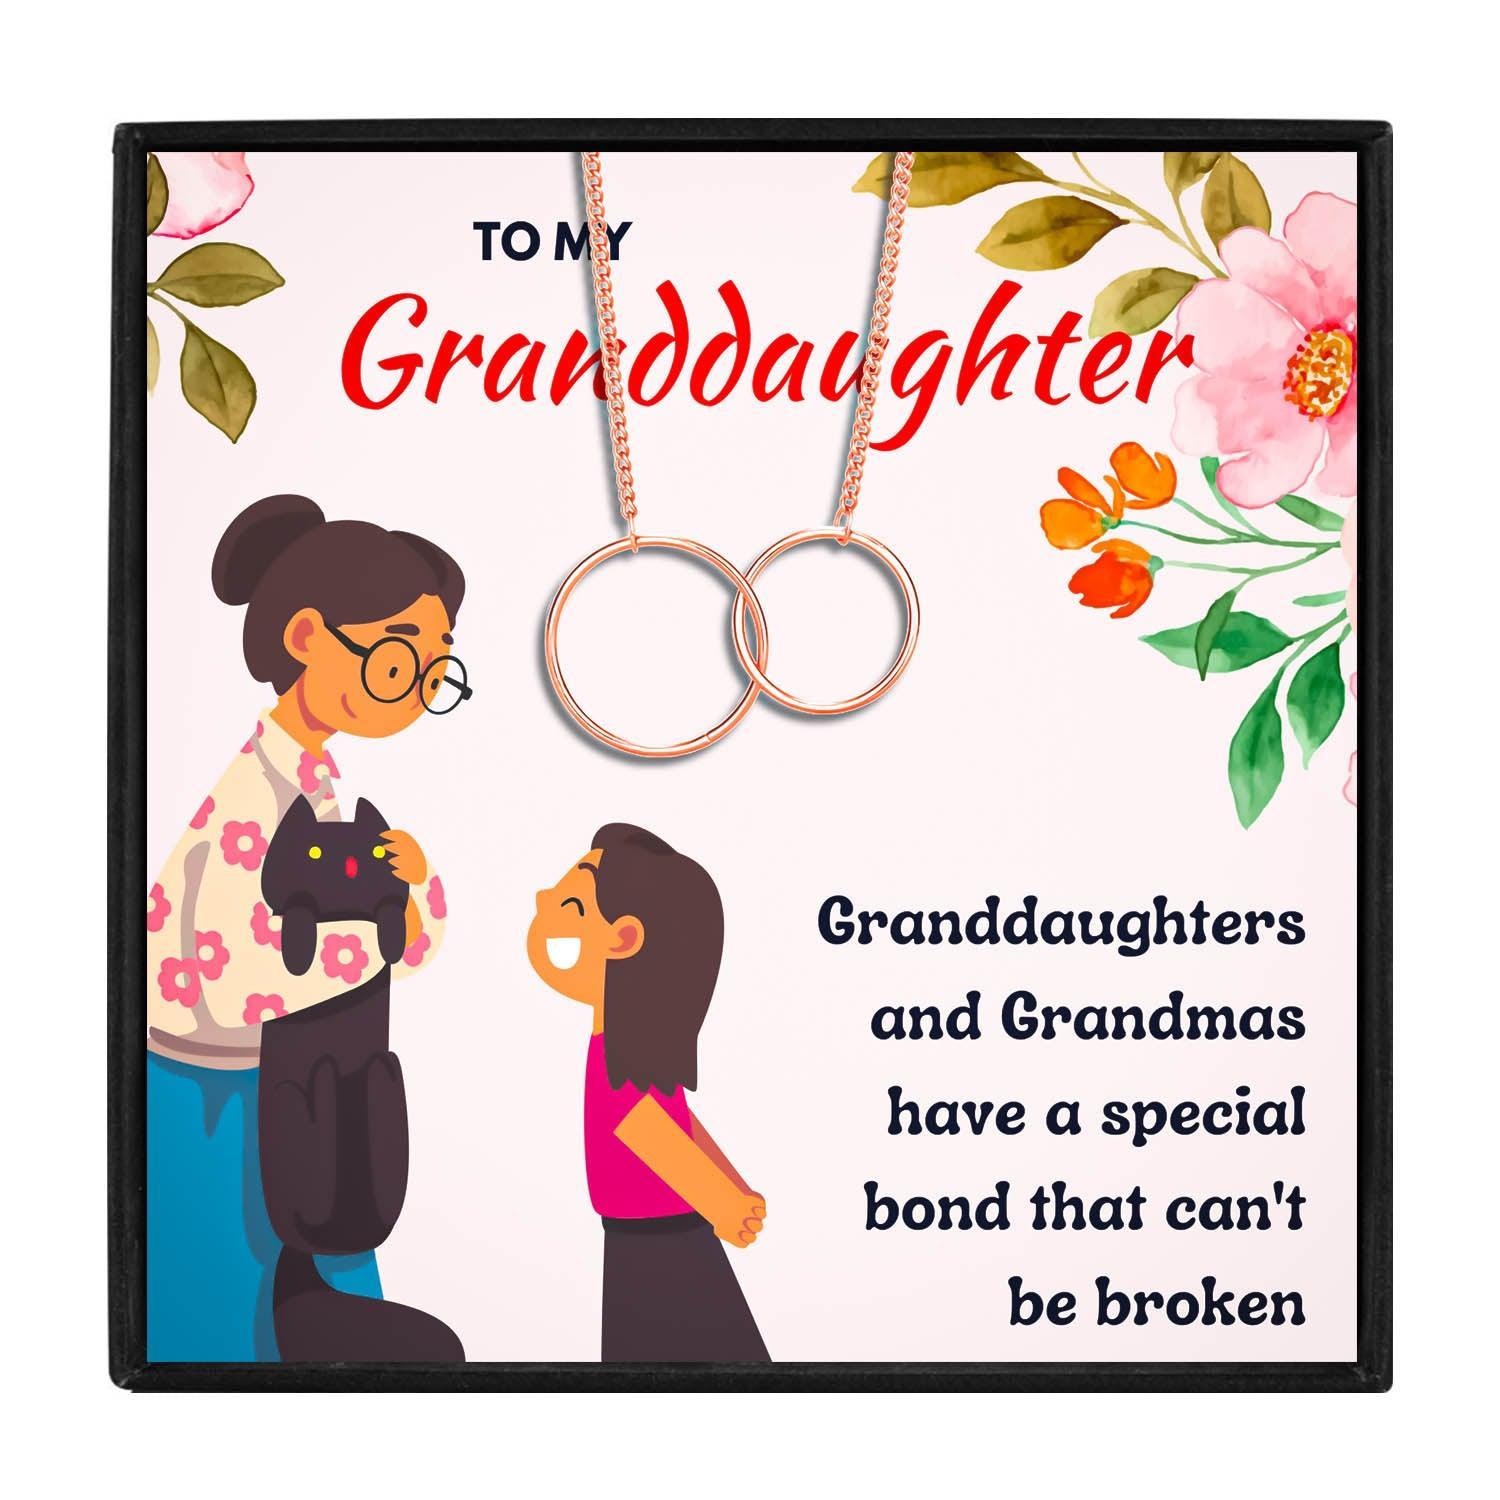 Thoughtful Gift Ideas For Your Granddaughter in 2023 | Thoughtful Gift Ideas For Your Granddaughter - undefined | granddaughter gifts from nana, Granddaughter Necklace, granddaughter necklace from grandma, grandma granddaughter necklace, grandmother granddaughter gifts | From Hunny Life | hunnylife.com